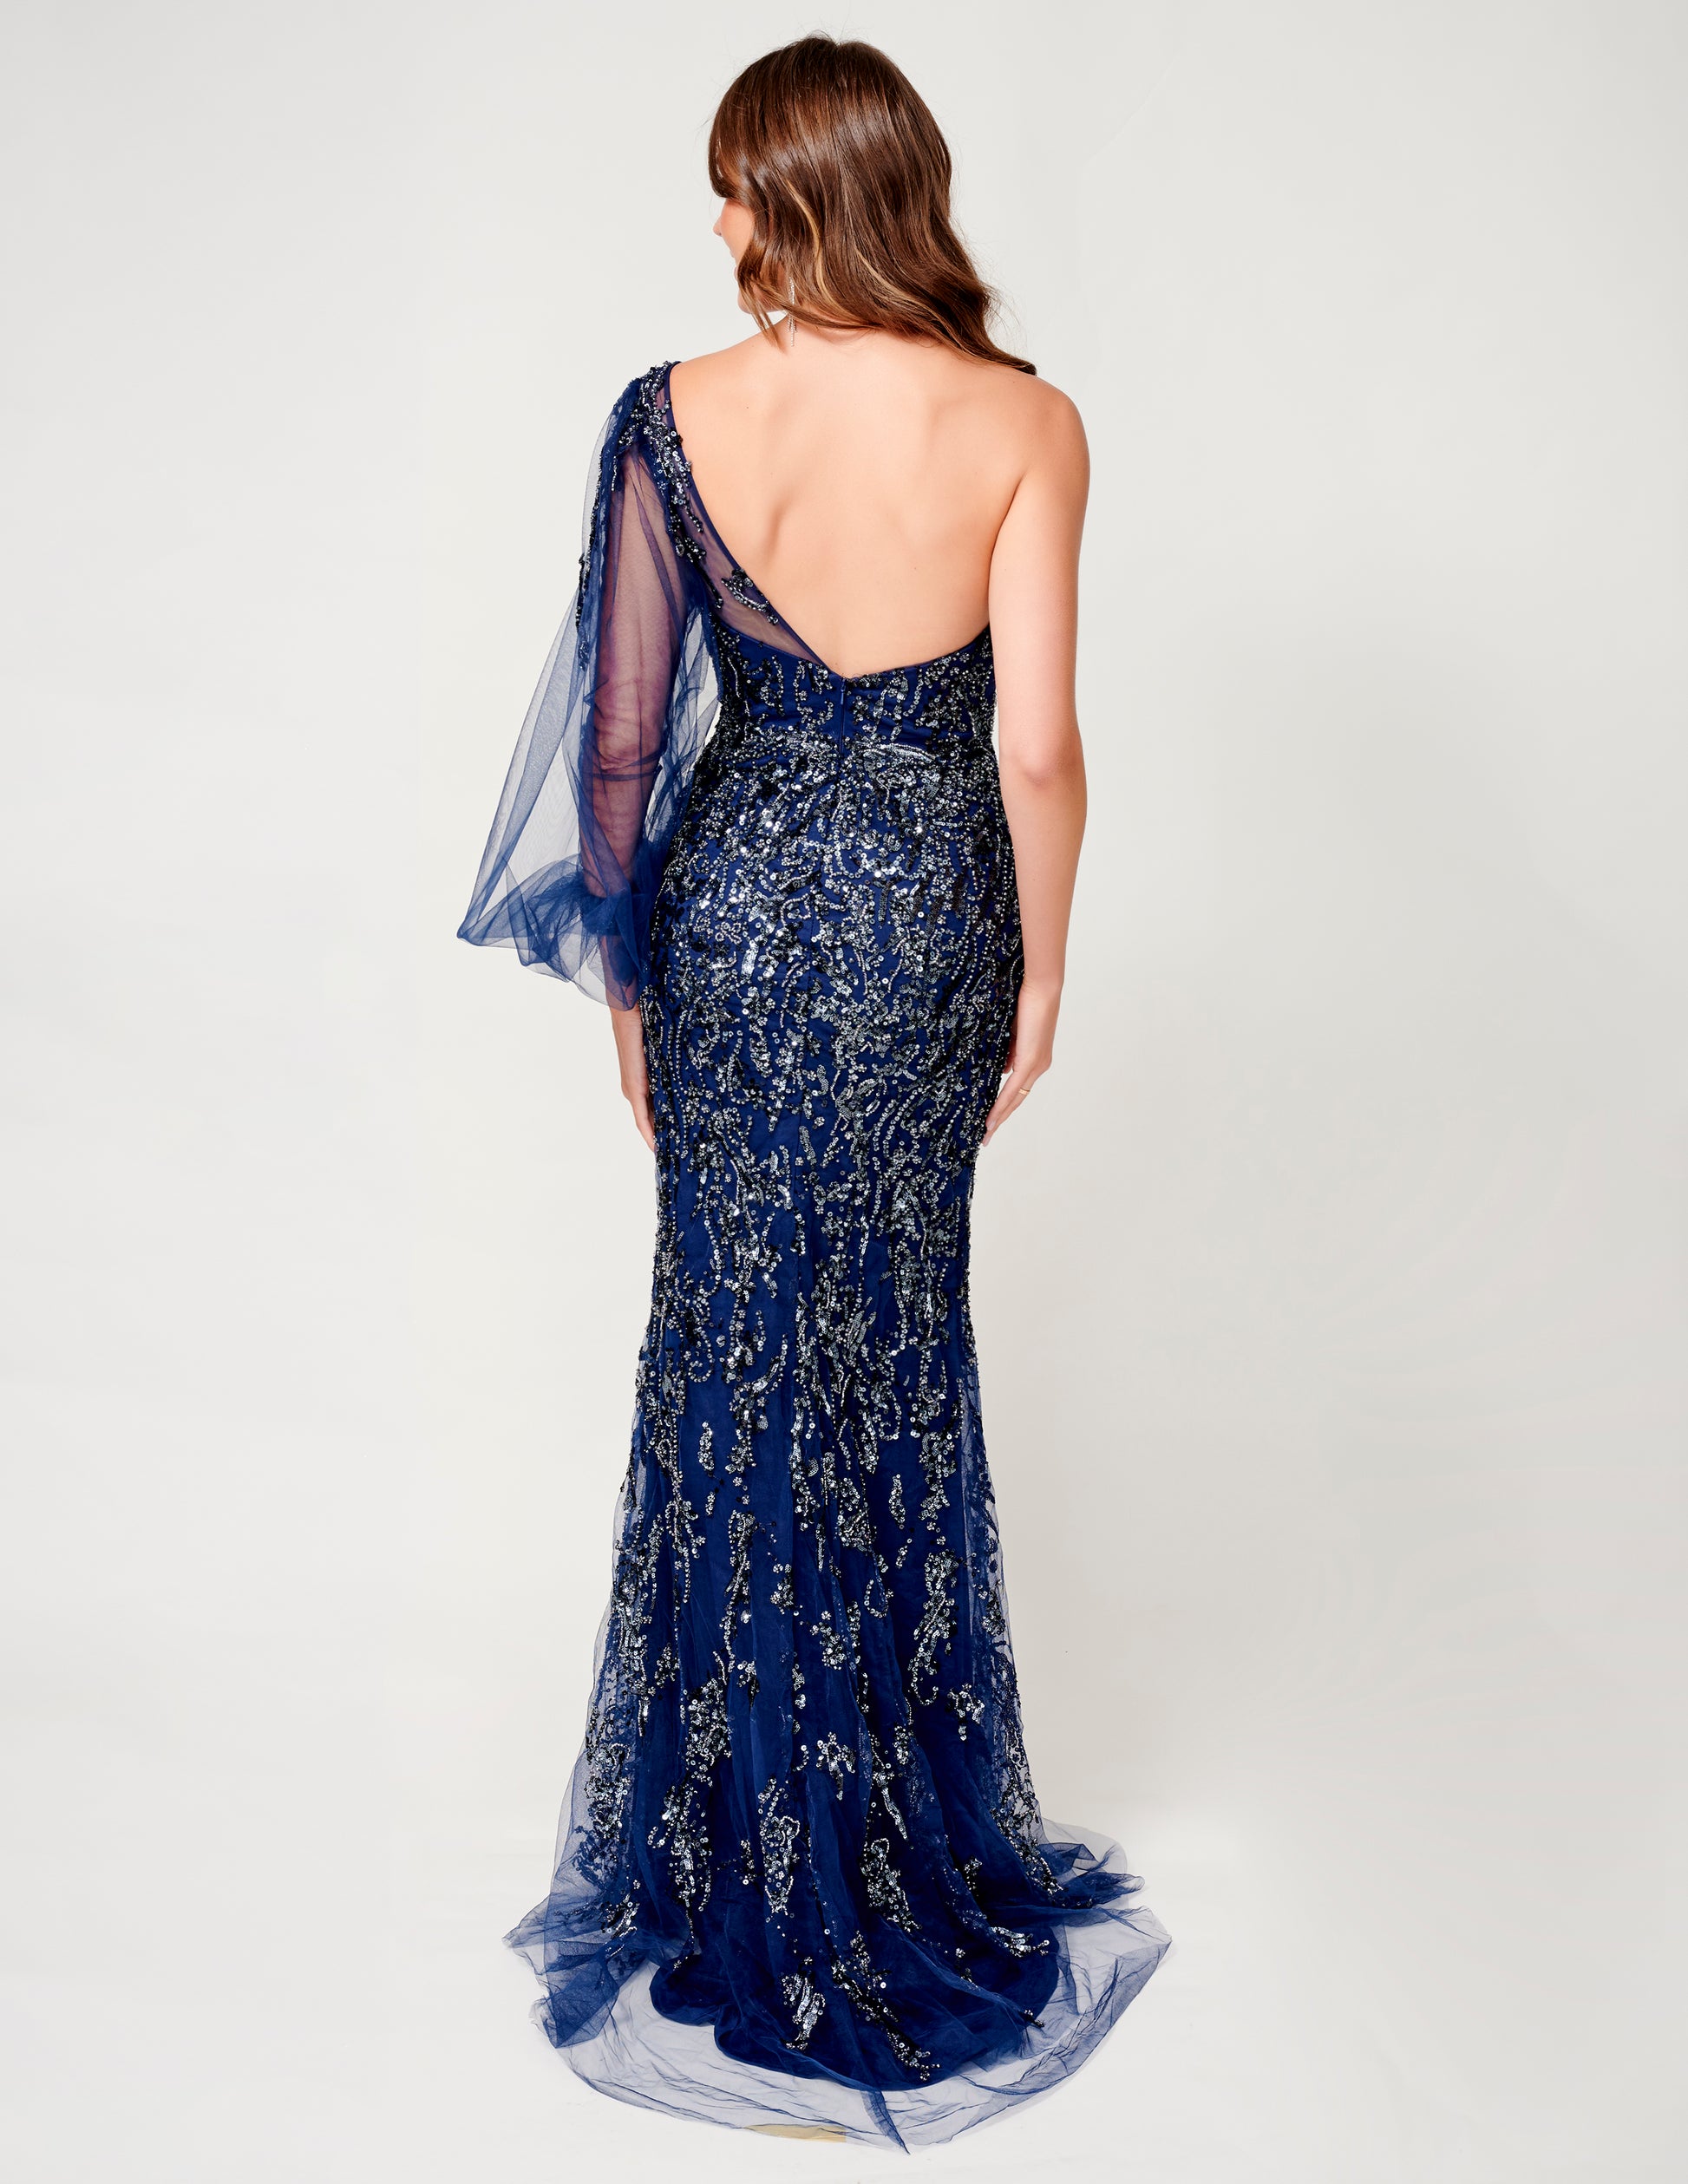 Elevate your evening style with this stunning Nina Canacci 9159 Navy Beaded Evening Gown. Featuring a flattering one shoulder neckline and elegant long sleeve, this formal gown is adorned with intricate beadwork for a touch of glamour. The side slit adds a touch of allure to this timeless and sophisticated piece. Perfect for any special occasion, this gown is sure to make a statement. Moth of Gown